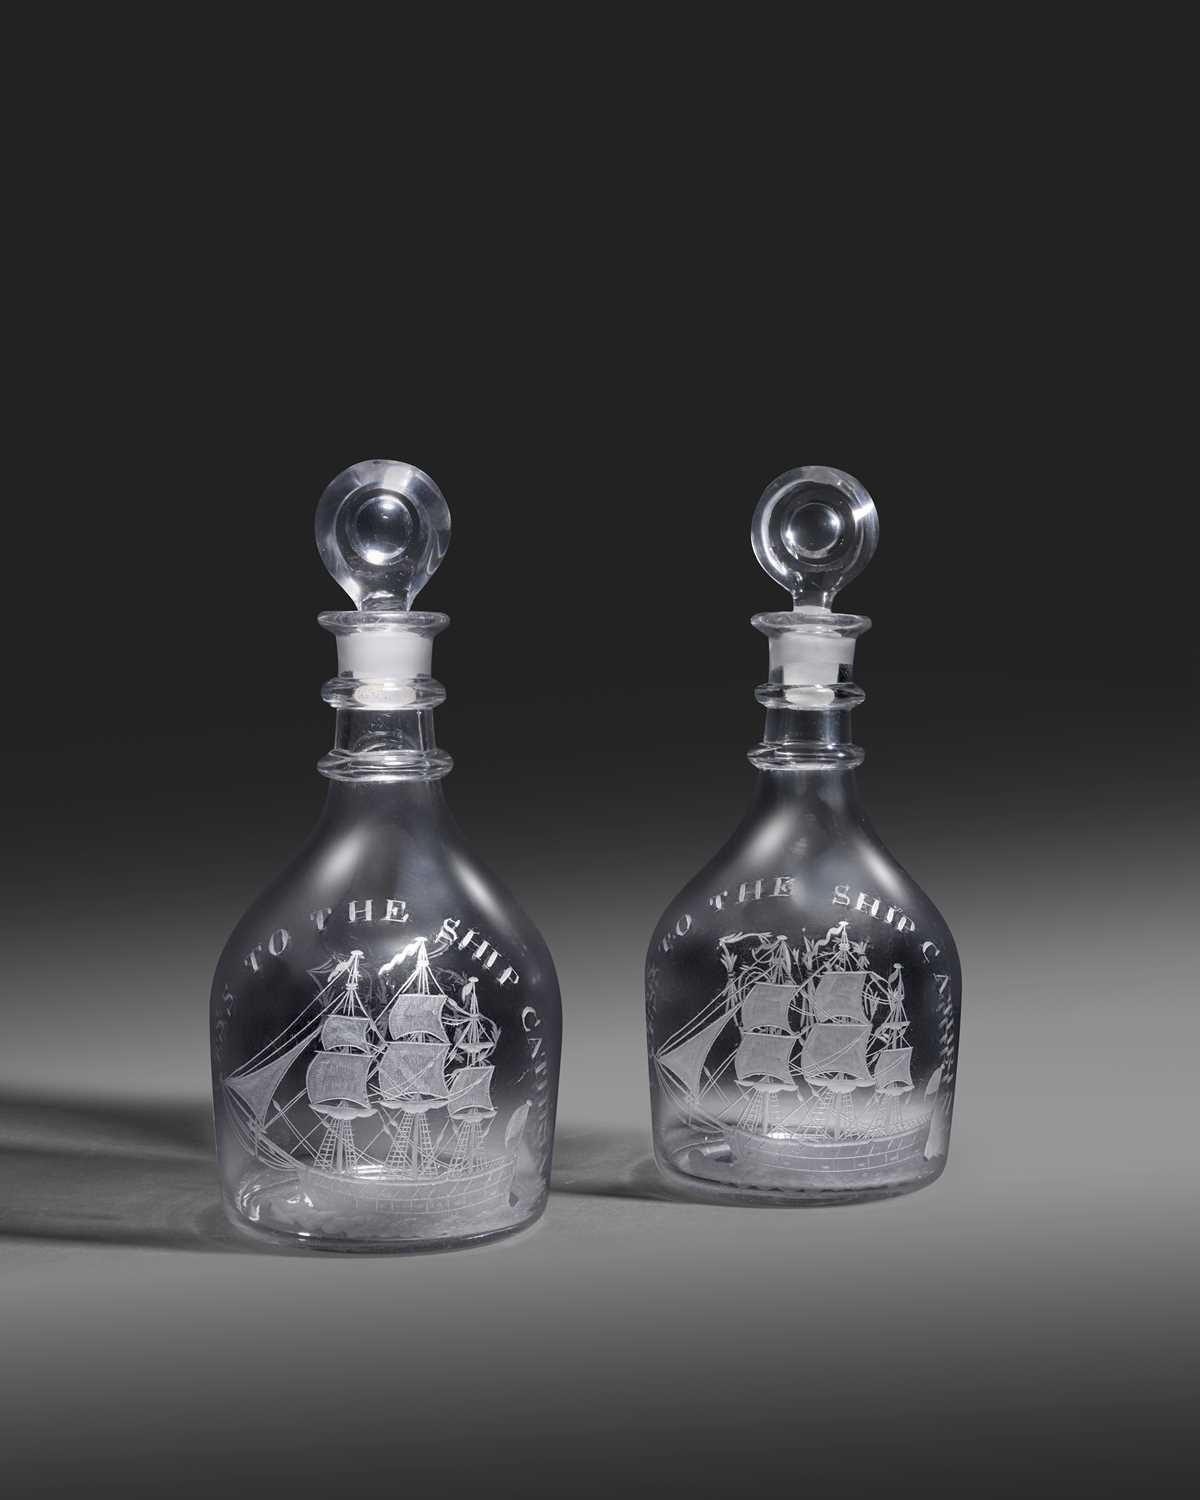 A pair of decanters and stoppers of shipping interest, late 18th/early 19th century, each engraved